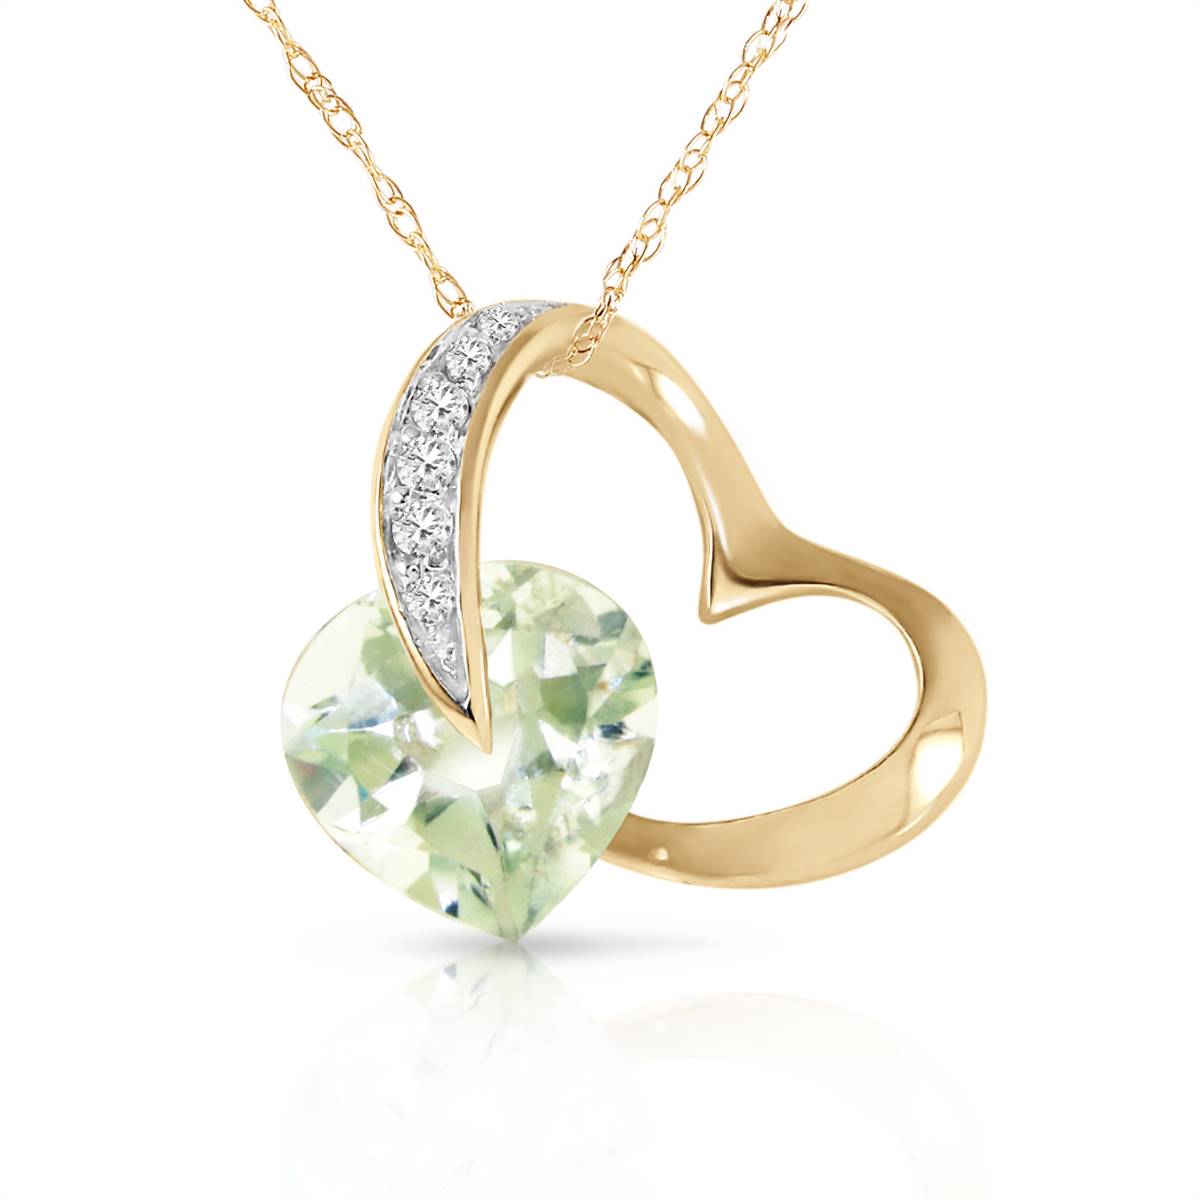 14K Solid Yellow Gold Heart Diamond & Green Amethyst Necklace